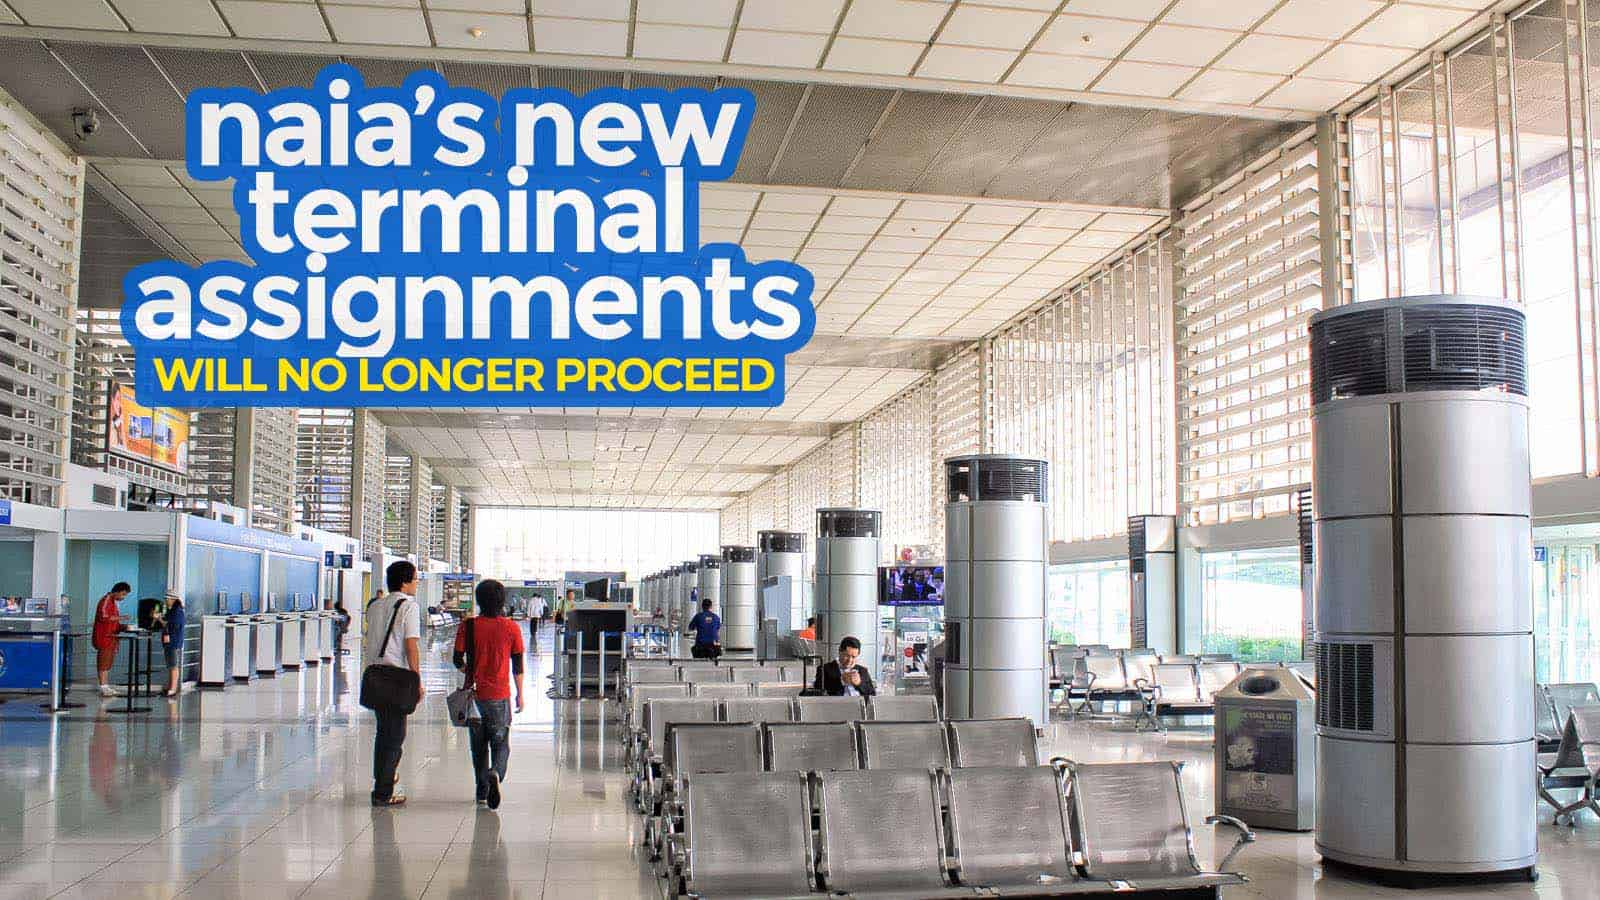 MANILA AIRPORT: New NAIA Terminal Assignments will NO LONGER Proceed